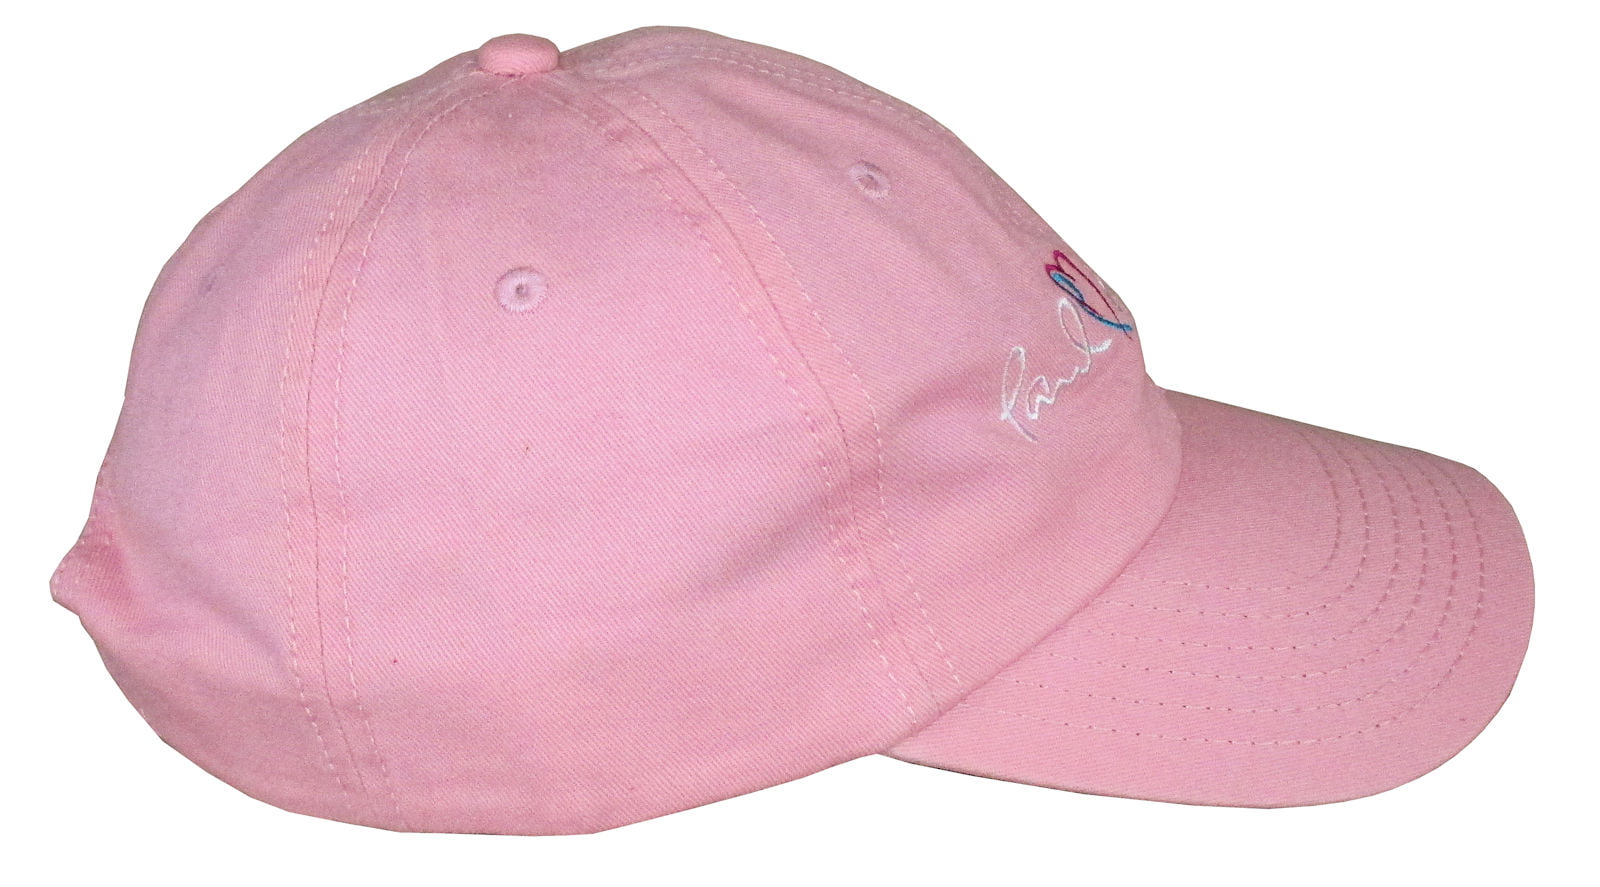 Paul McCartney Embroidered PM Heart Pink Baseball Cap Hat New Official Adult 